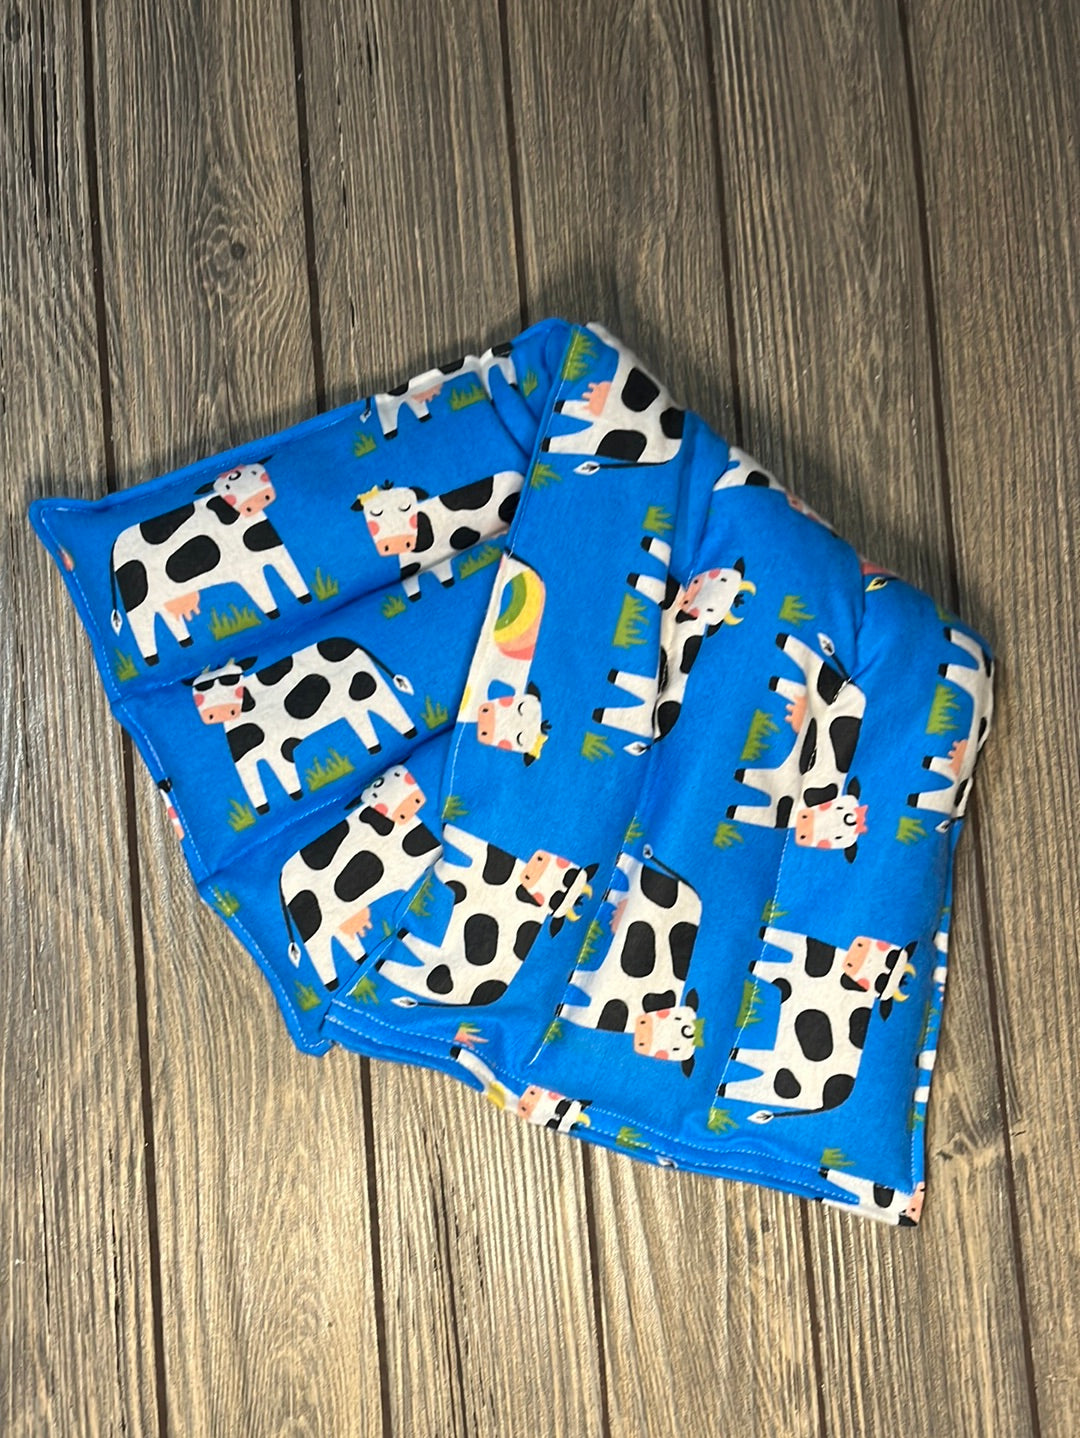 Heat Therapy Rice Bag, KC Back Therapy, Cows